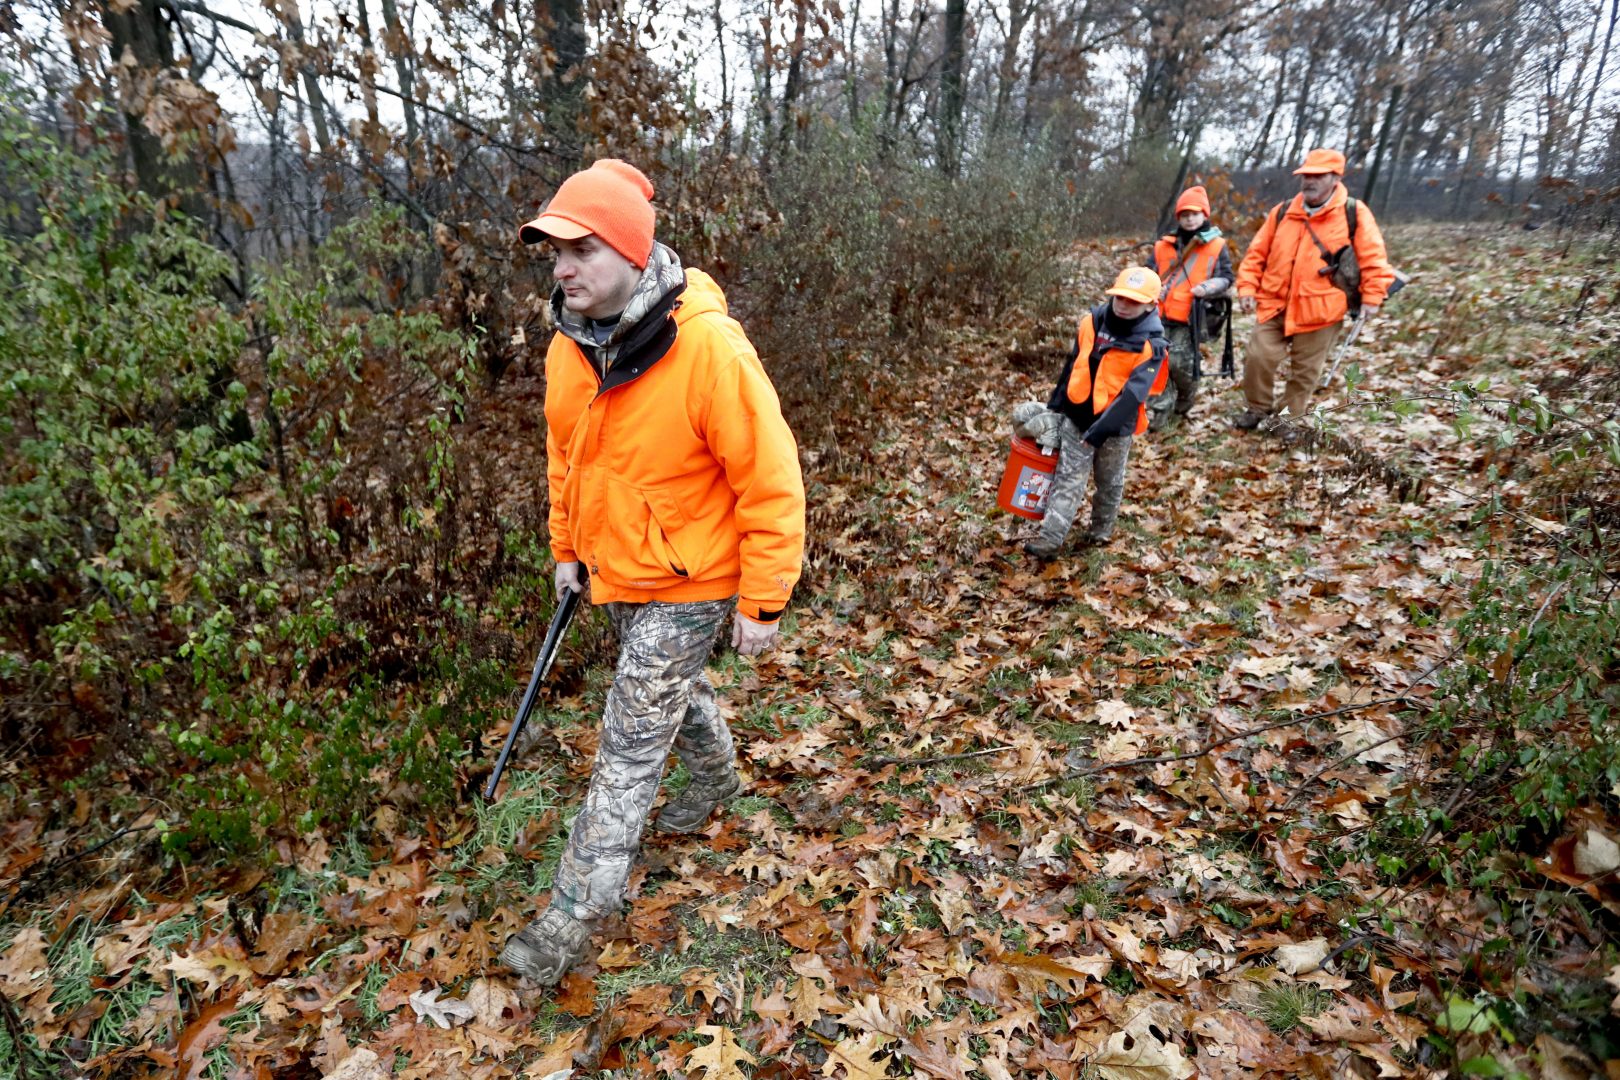 Dominick Cerminaro, left, leads his sons, Paul Cerminaro, center left, Santo Cerminaro, center right, and his father, Santo Cerminaro, right, into the woods to go deer hunting on the first day of regular firearms deer hunting season in most of Pennsylvania, Monday, Nov. 26, 2018 in Zelienople, Pa.